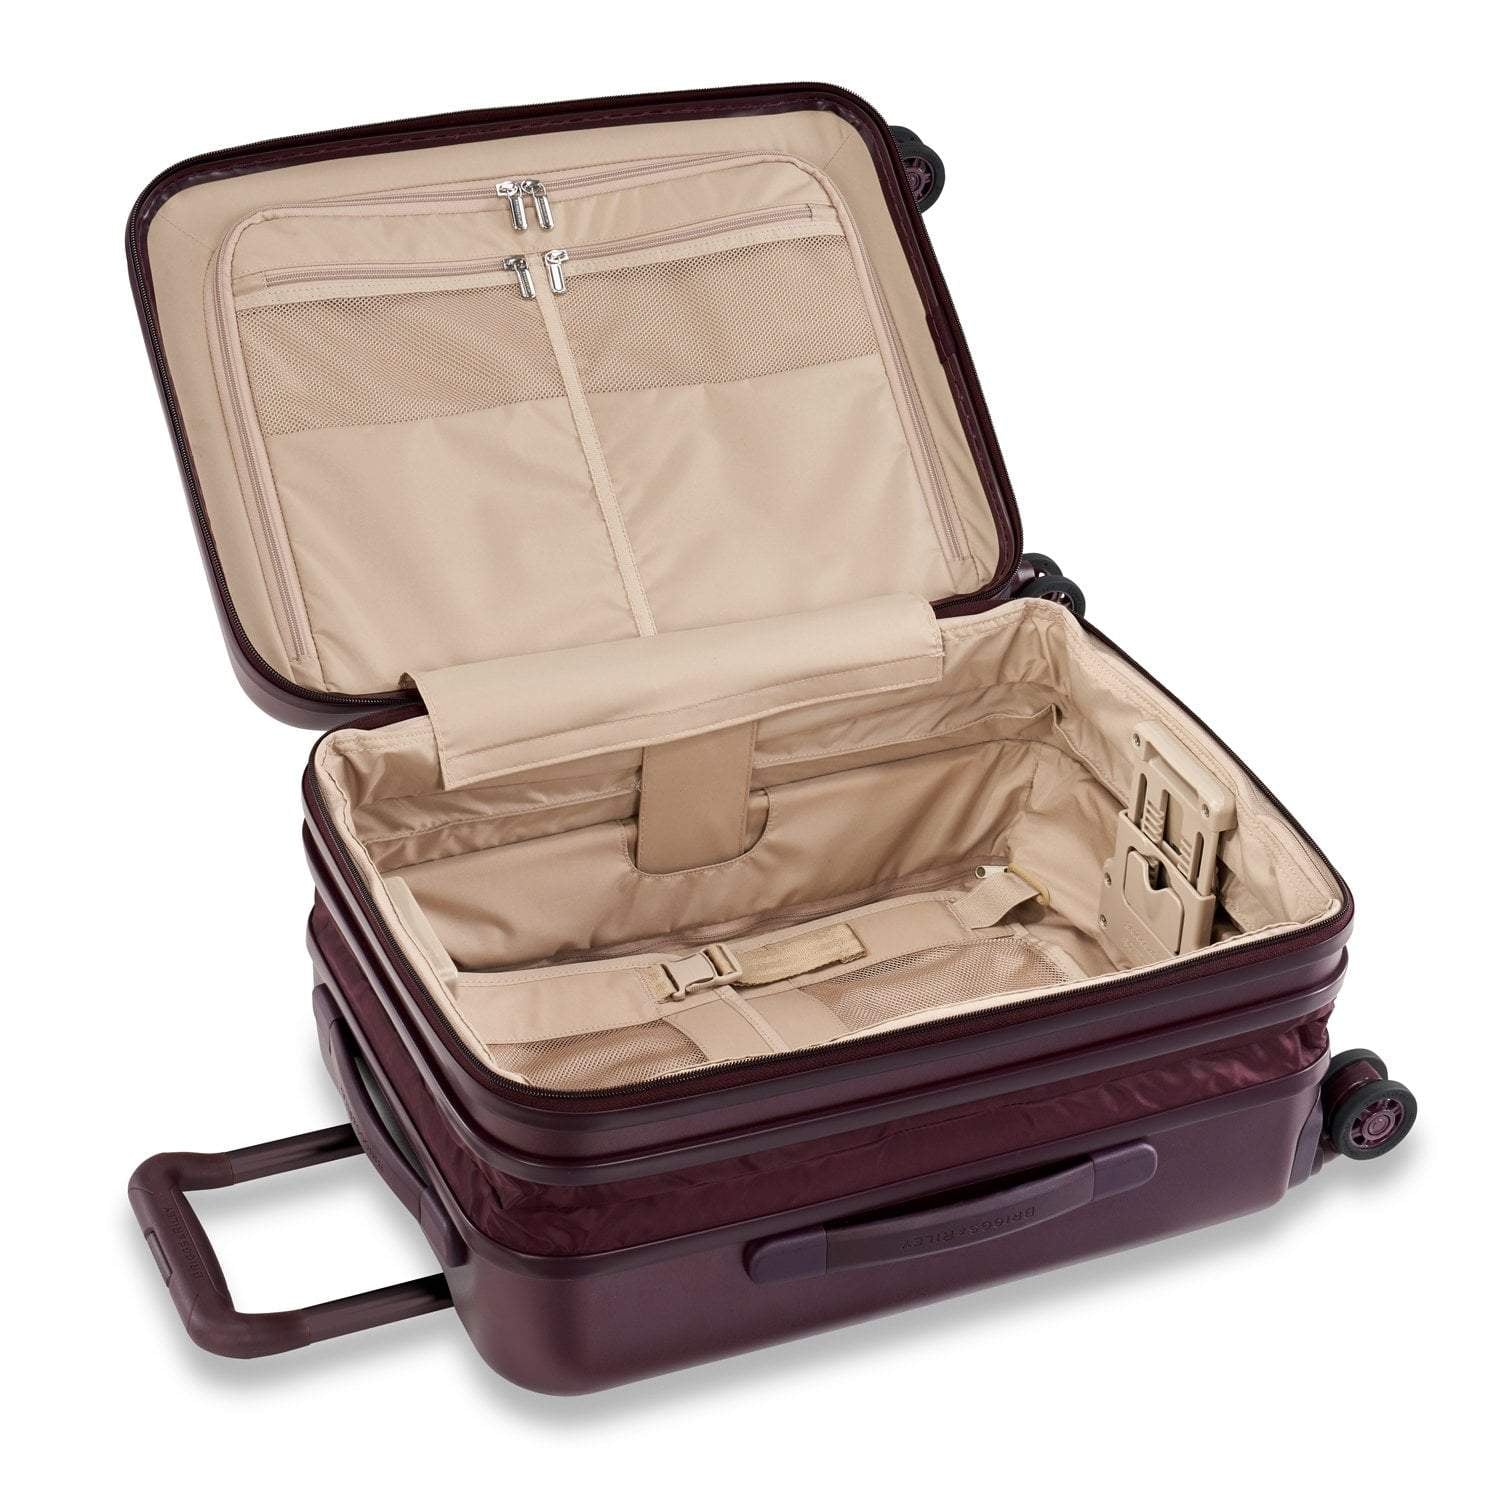 Briggs & Riley Sympatico International Carry-On Expandable Spinner Luggage